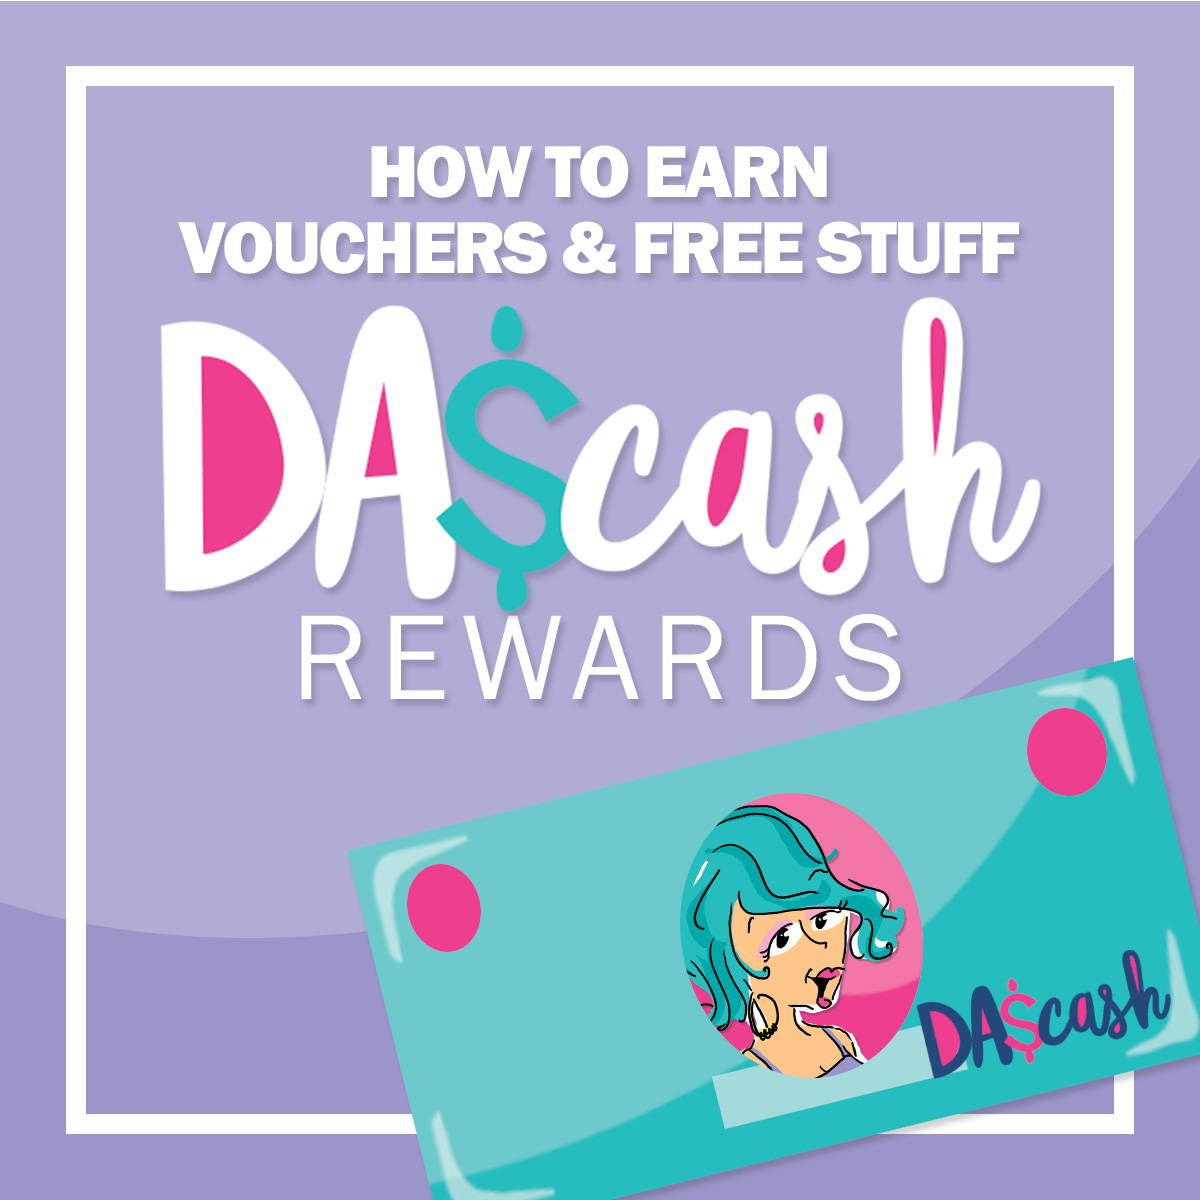 Learn How to Earn Free Gifts, Vouchers, & More with the DAS Cash Rewards Program